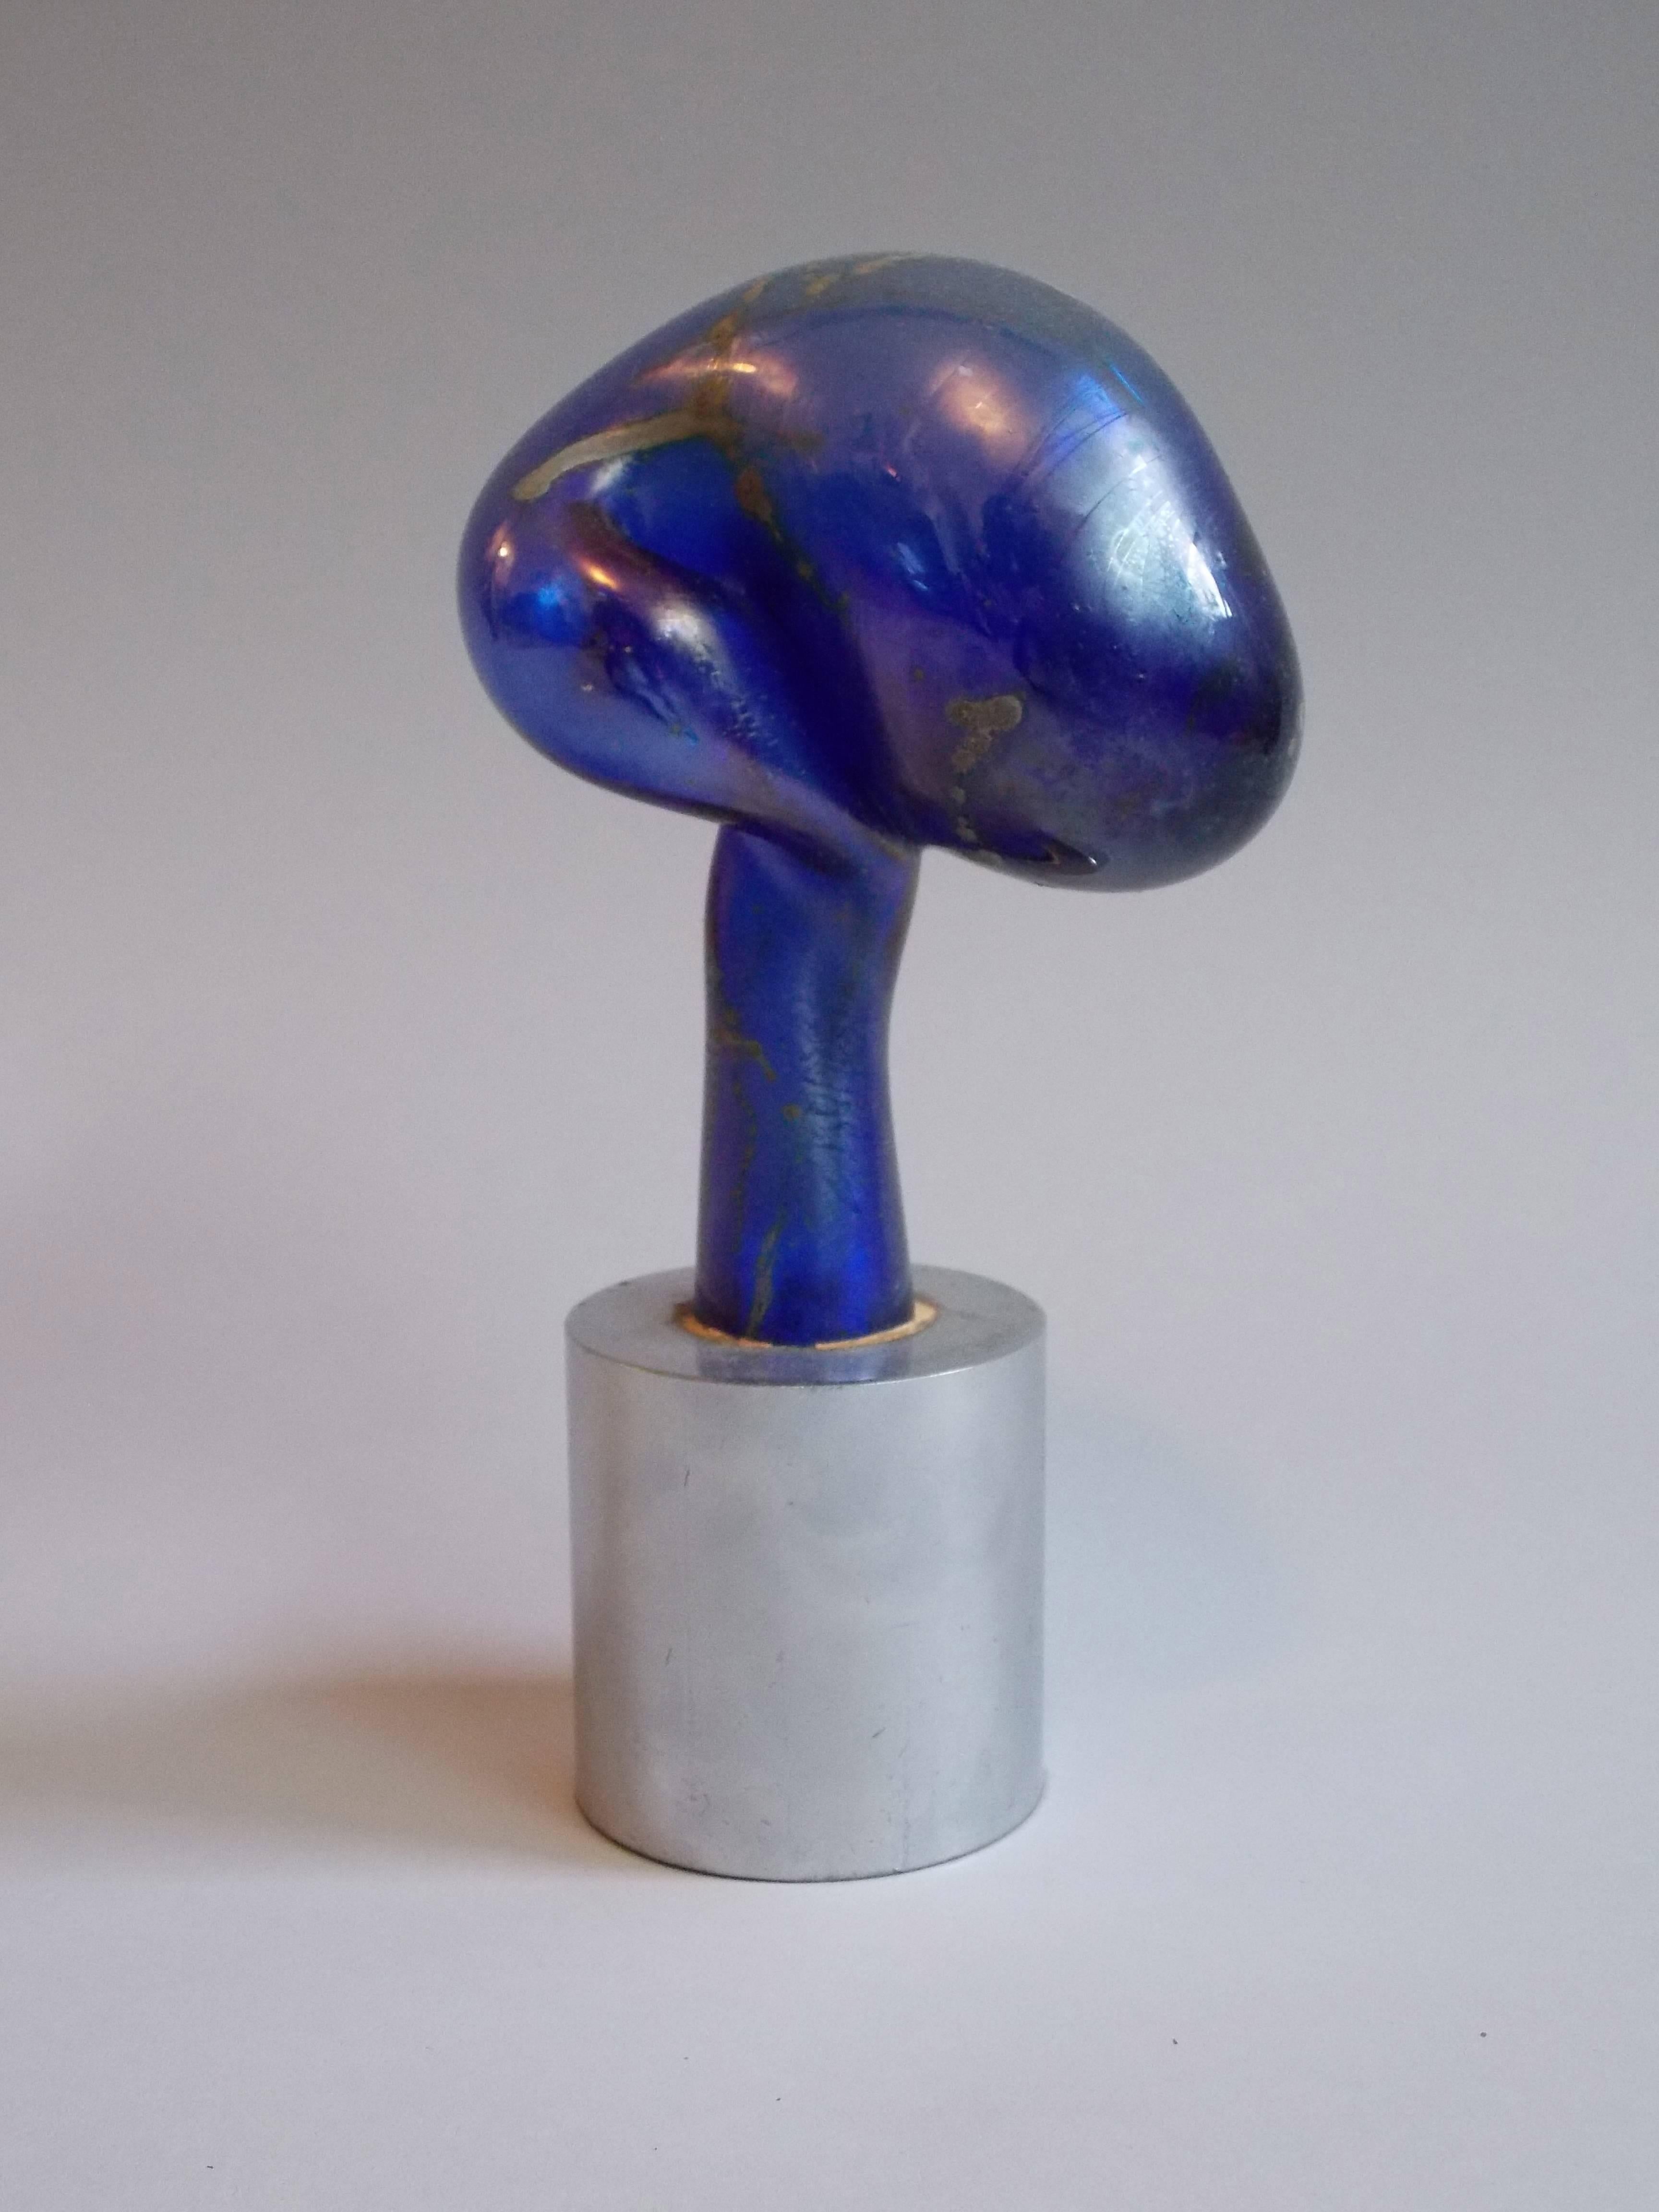 1932-2013.
A well listed artist who was a professor, author and potter.
This is rare piece of art by him.
Made of handblown glass with a beautiful blue hue, embedded onto a solid steel base.
It is stamped on the base 